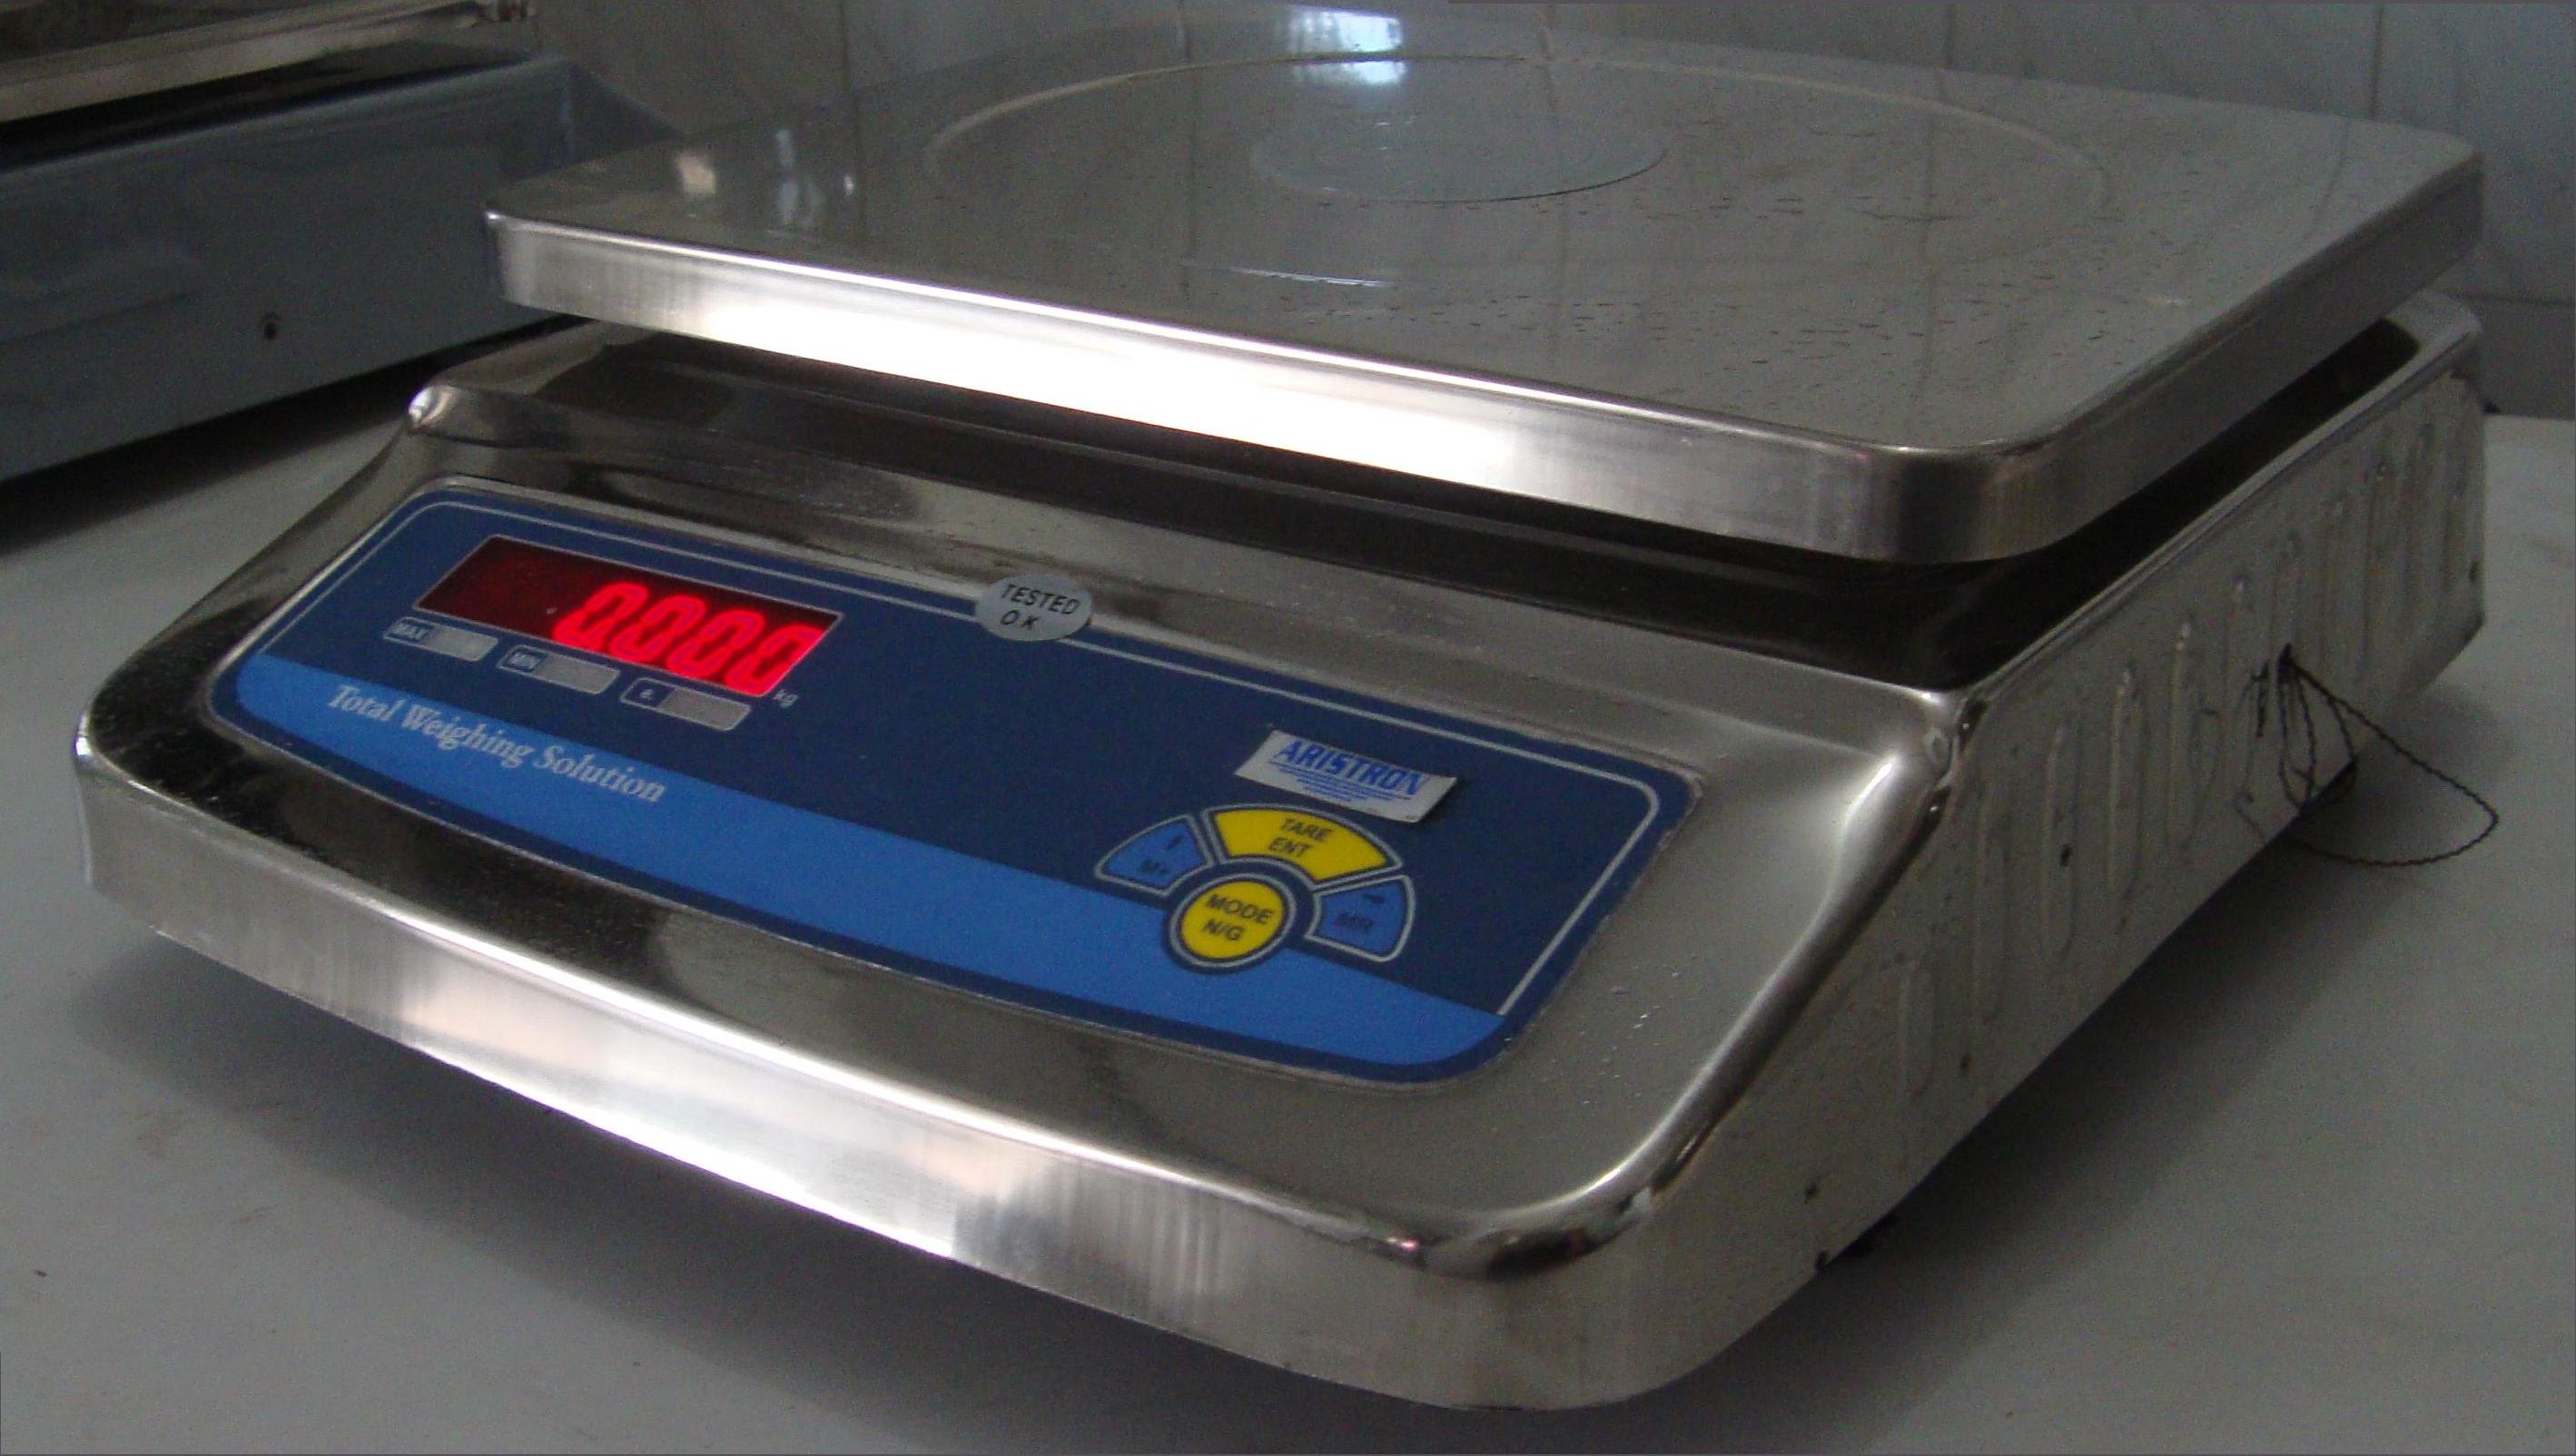 Electronic Table Top Weighing Scale Manufacturer Supplier Wholesale Exporter Importer Buyer Trader Retailer in Mumbai Maharashtra India